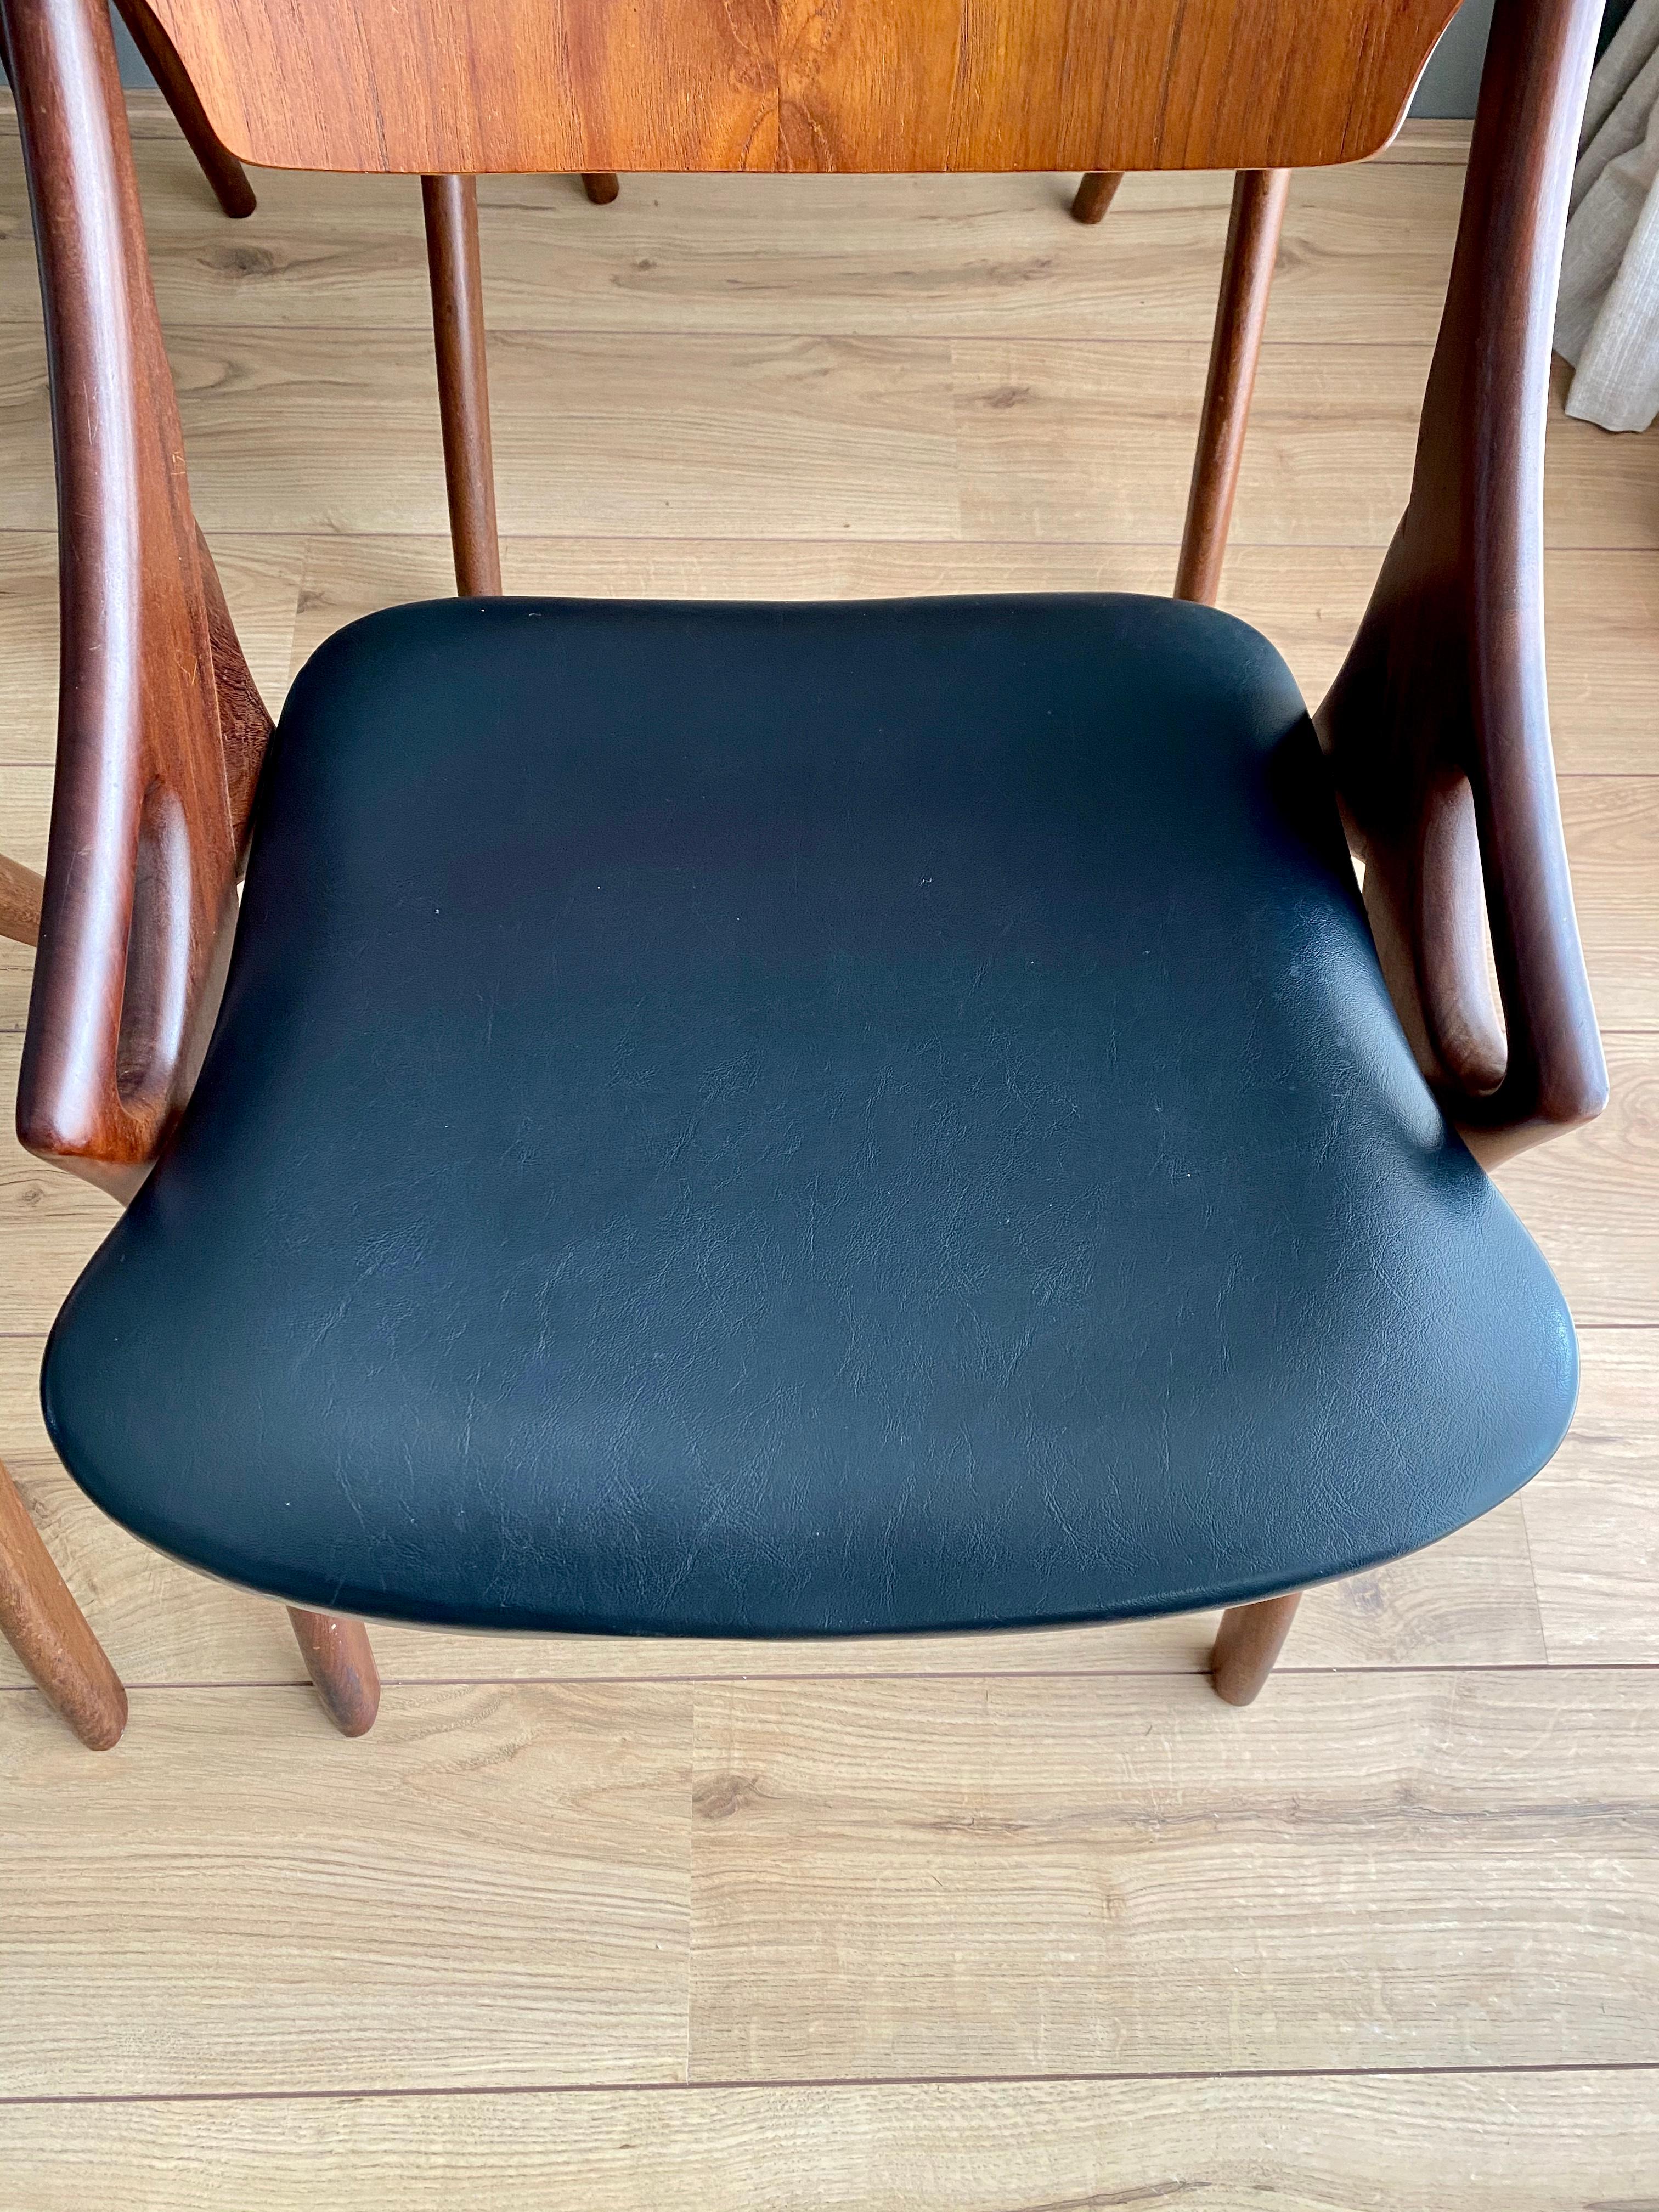 Faux Leather Arne Hovmand Olsen Dining Room Chairs, for Mogens Kold, Set of Four, circa 1950s